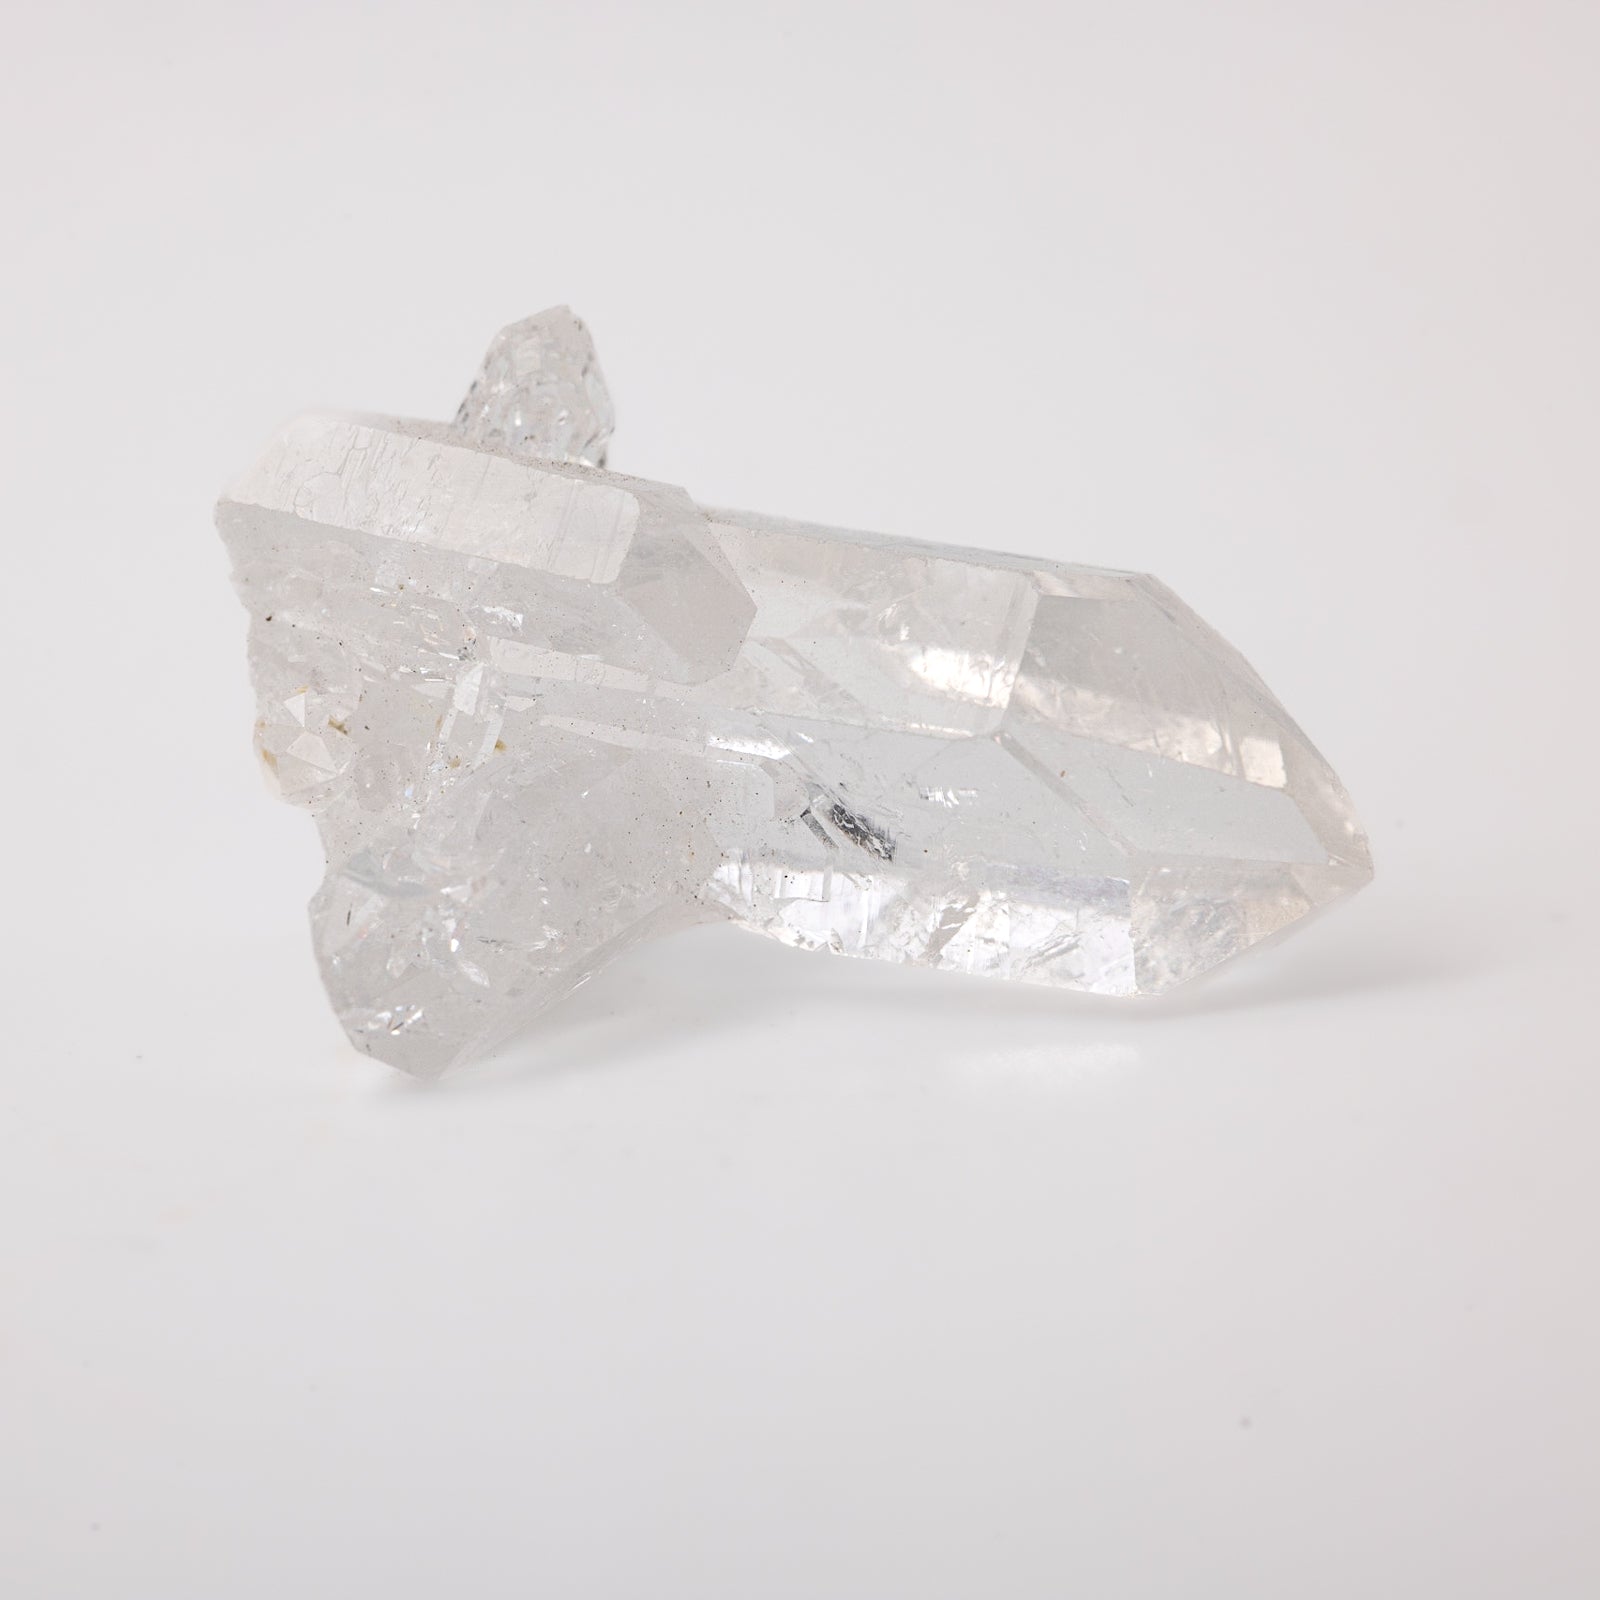 Clear Quartz clusters, approximately 1"+ in size, handpicked for you by Juniper Stones.